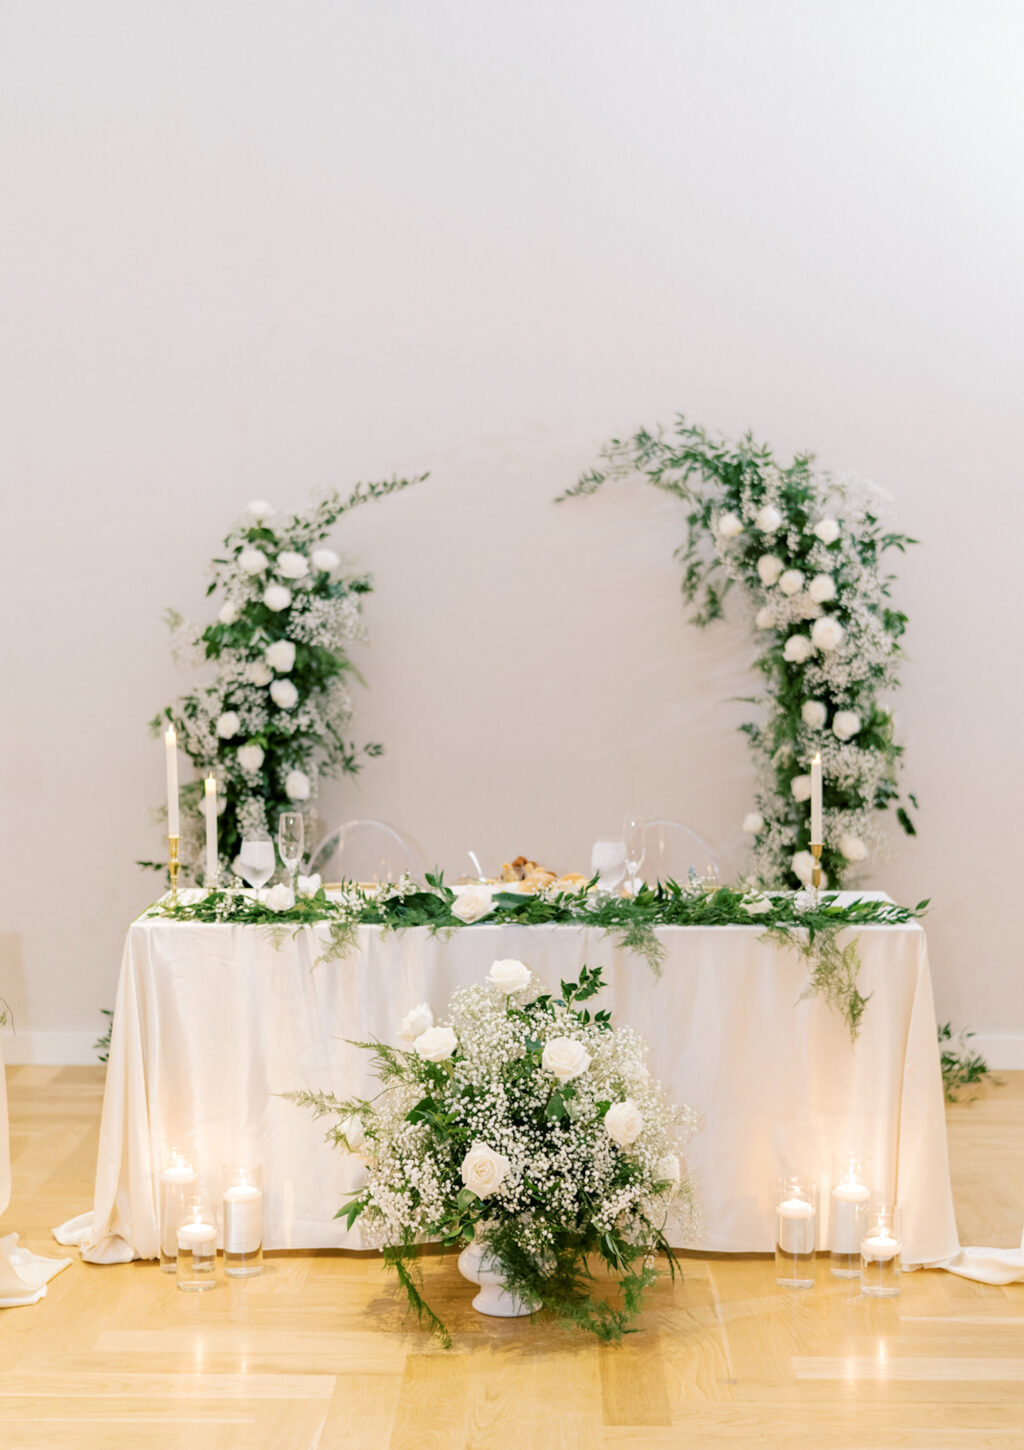 Wedding Reception Sweetheart Table Inspiration with Neutral Linen, Floating Candles and Greenery Garland | Asymmetrical Floral Backdrop with Baby's Breath and White Rose Ideas